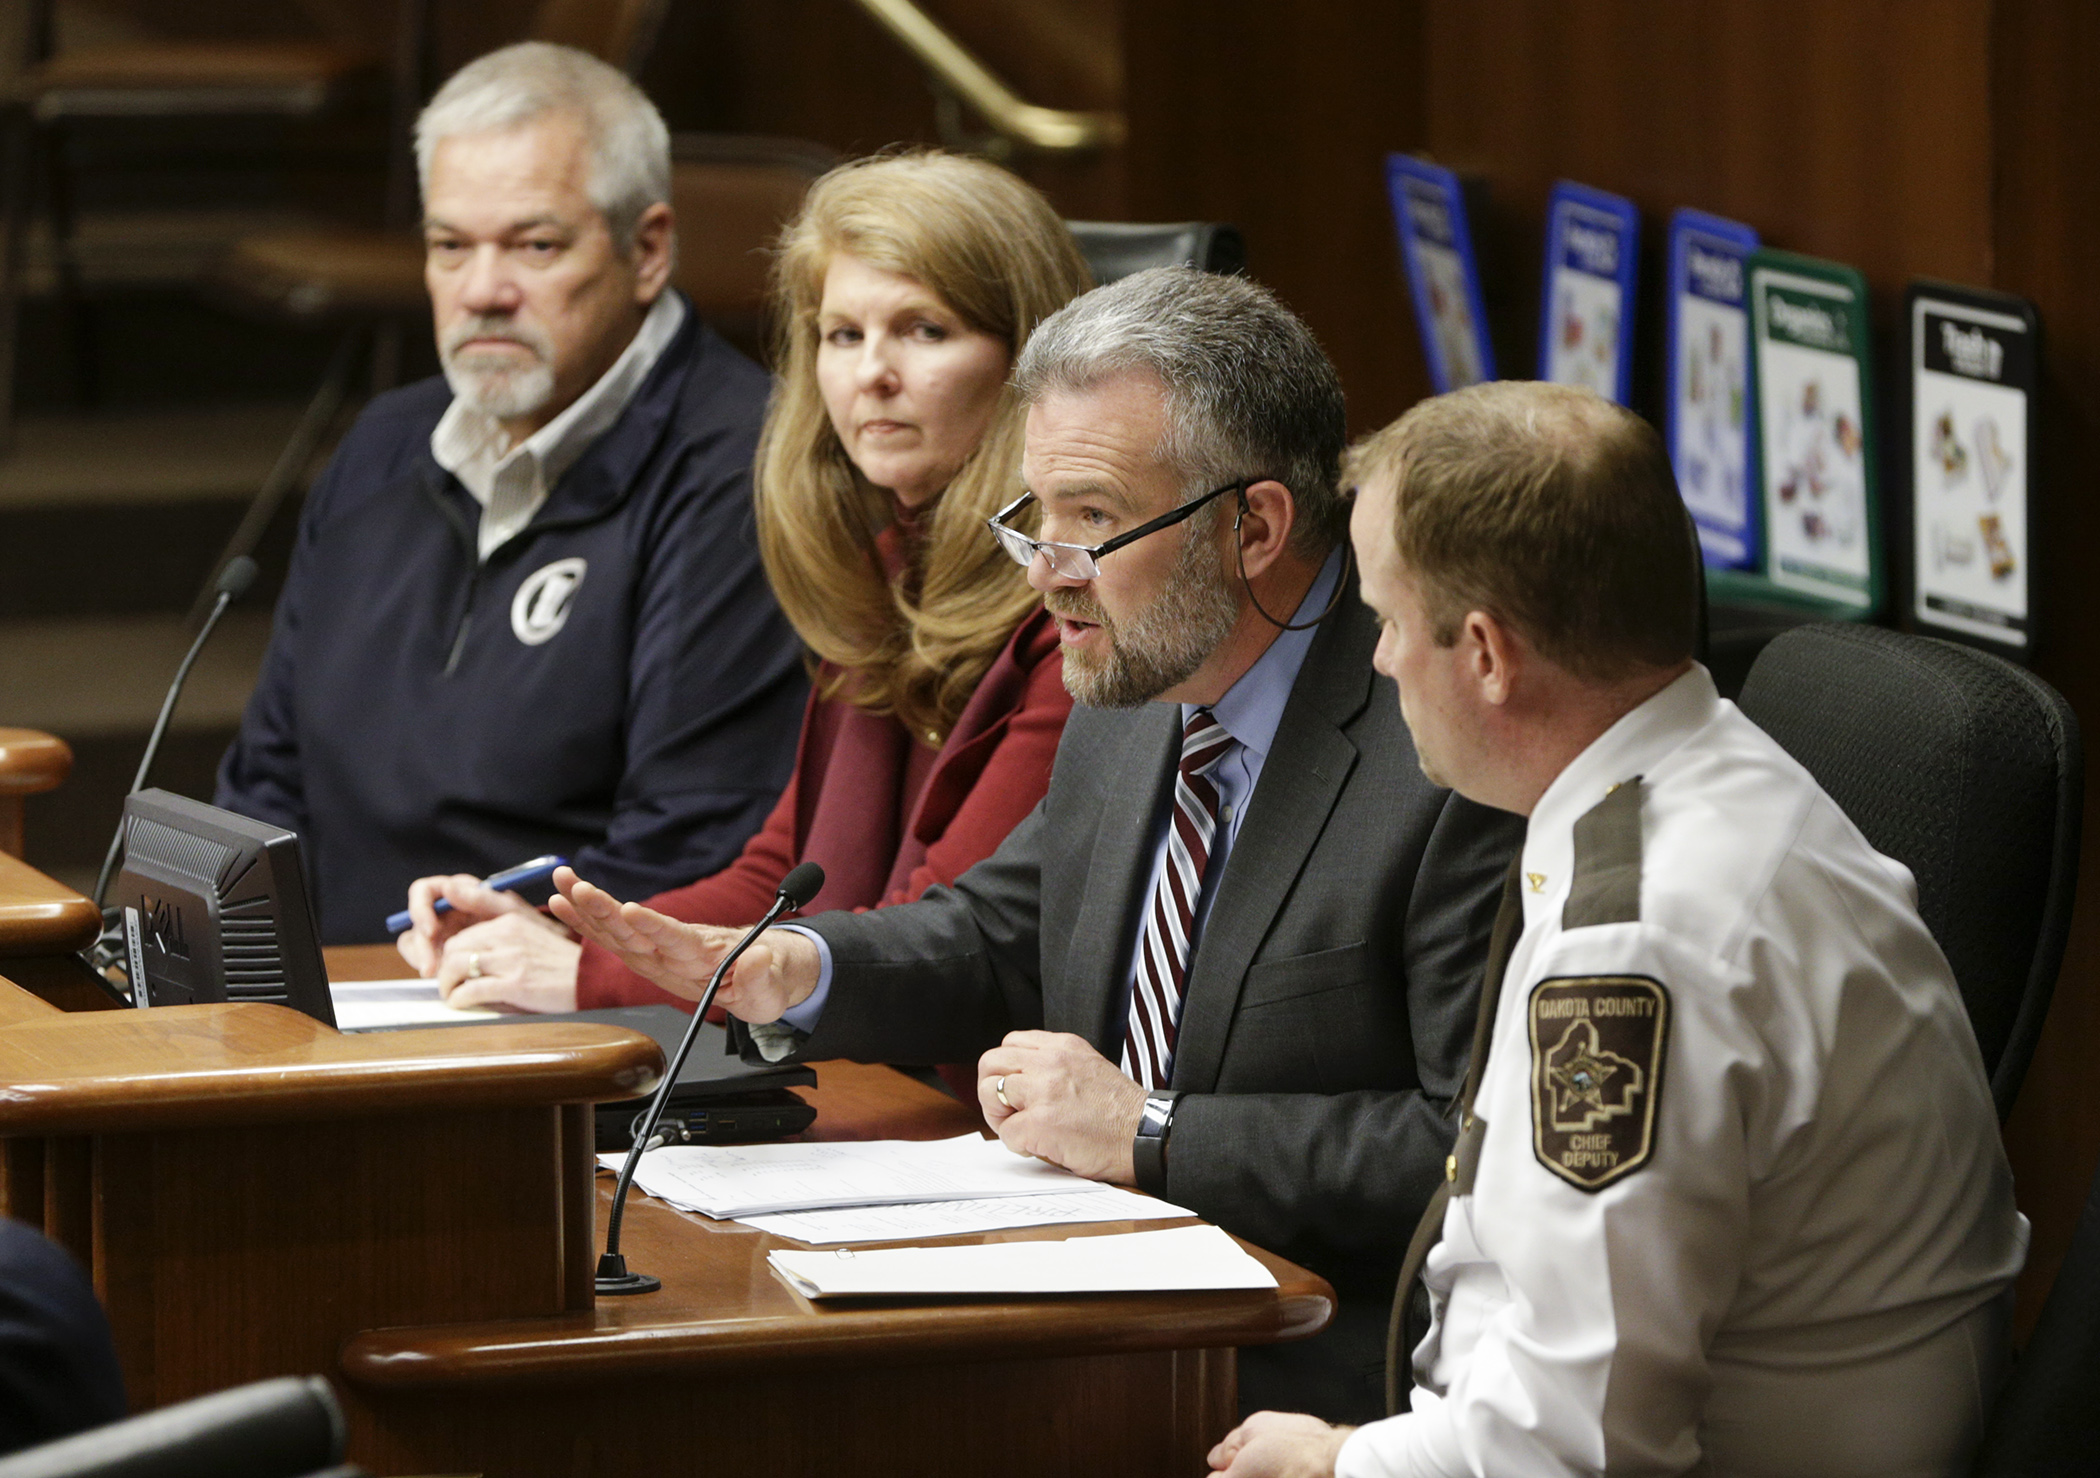 Dakota County Manager Matt Smith answers a question during March 7 testimony before the House Capital Investment Committee on HF2922, sponsored by Rep. Regina Barr, second from left. Photo by Paul Battaglia